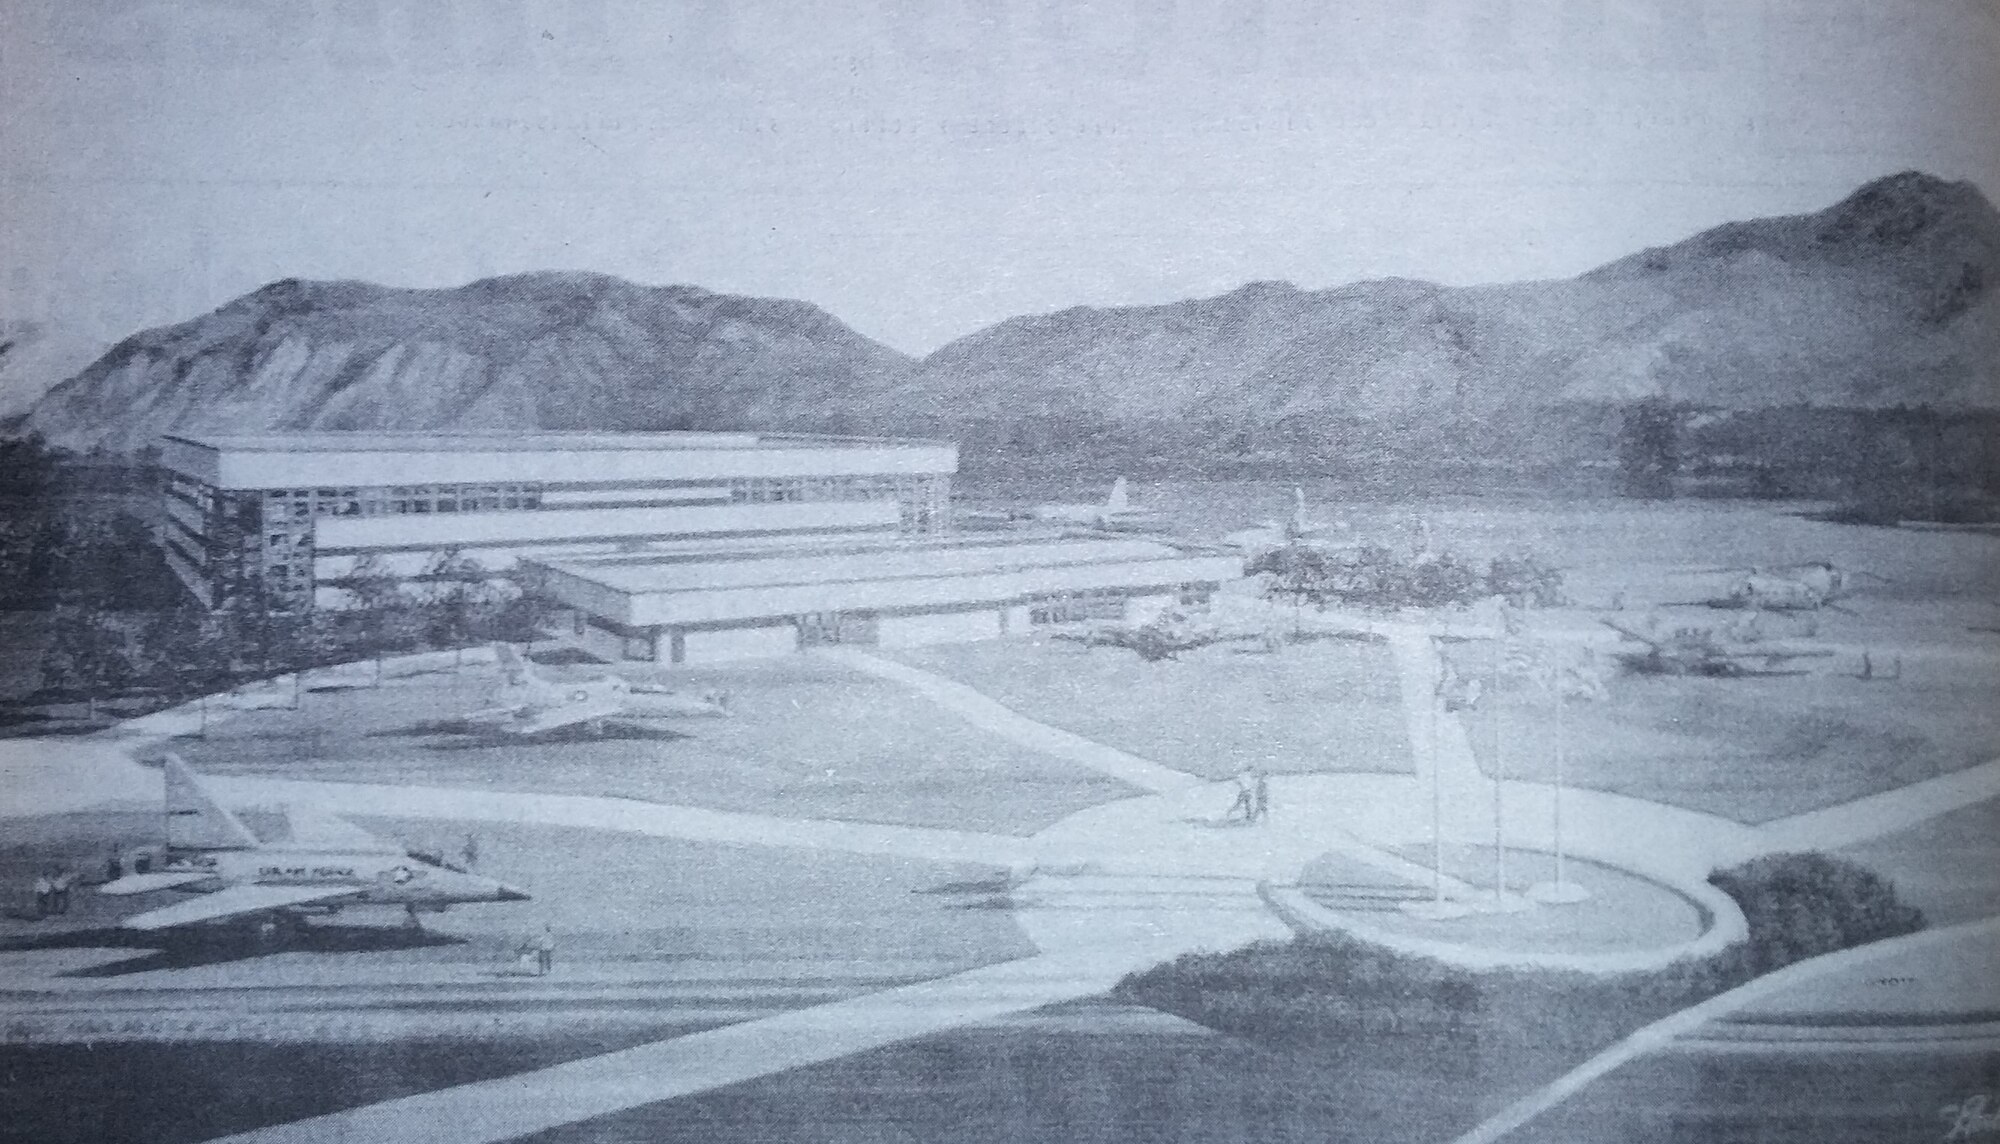 This illustration is an artist’s conception of what the Hill Aerospace Museum would look like after construction, as shown in the Hilltop Times issue published on March 23, 1990.